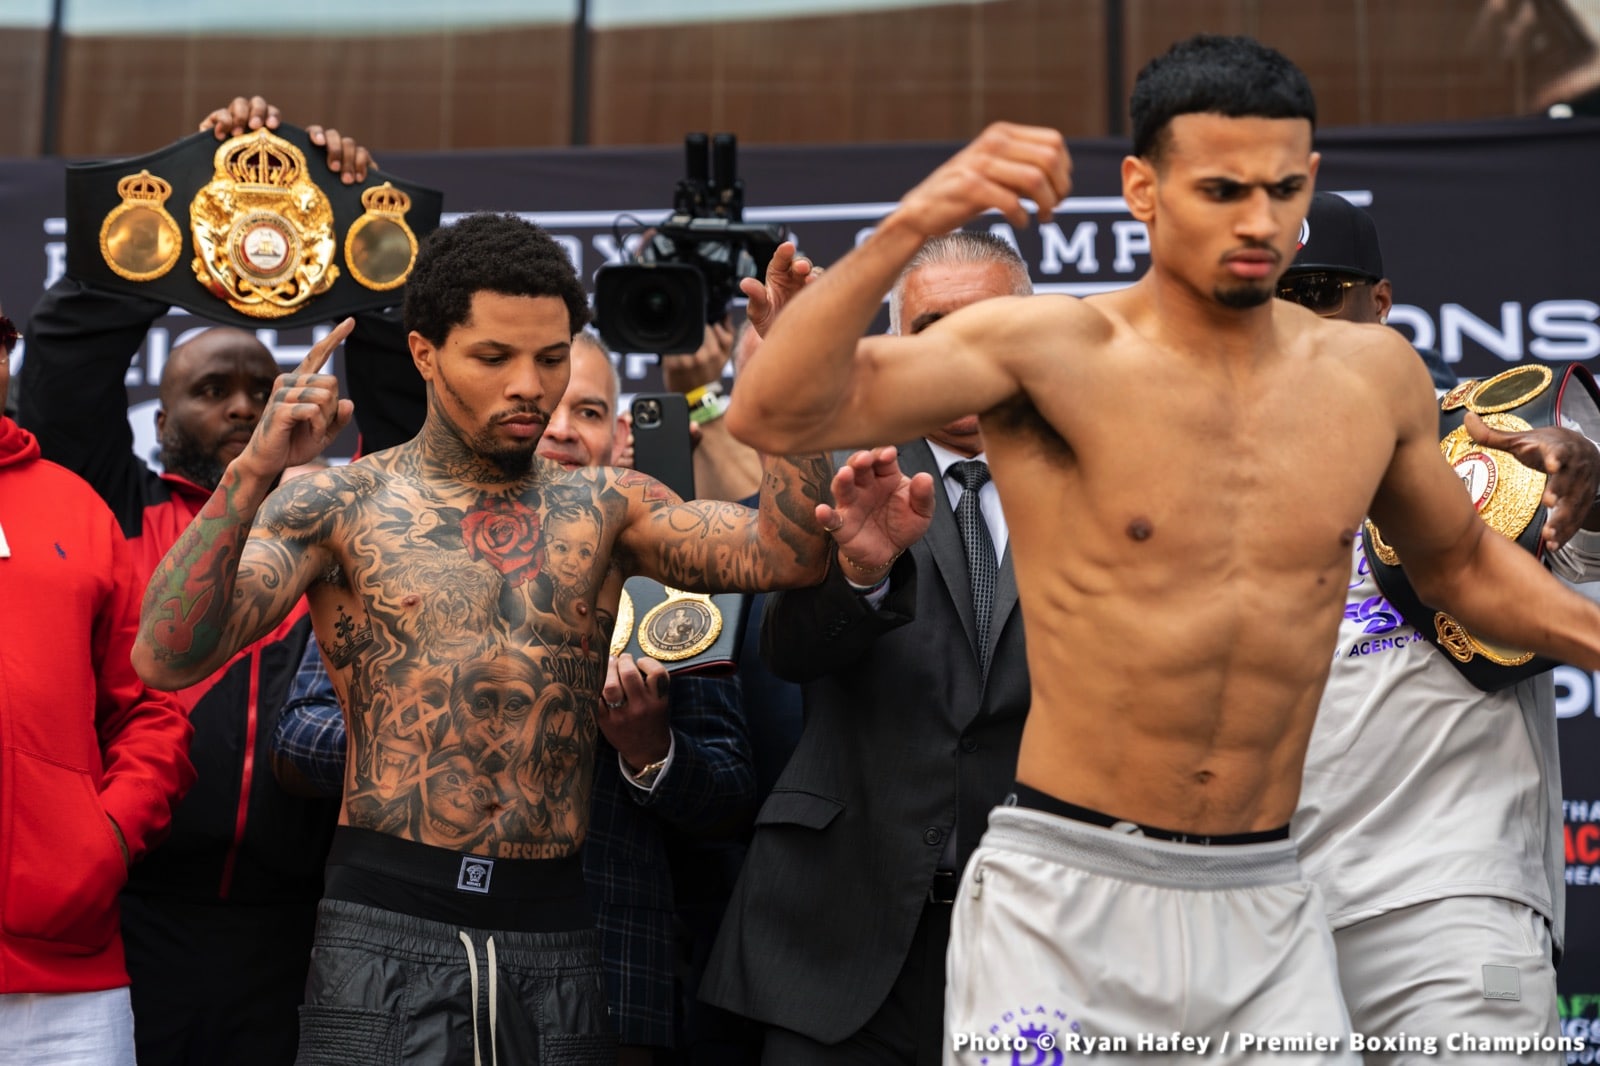 Image: Gervonta Davis 133.75 vs. Rolly Romero 134.25 - Weigh-in results